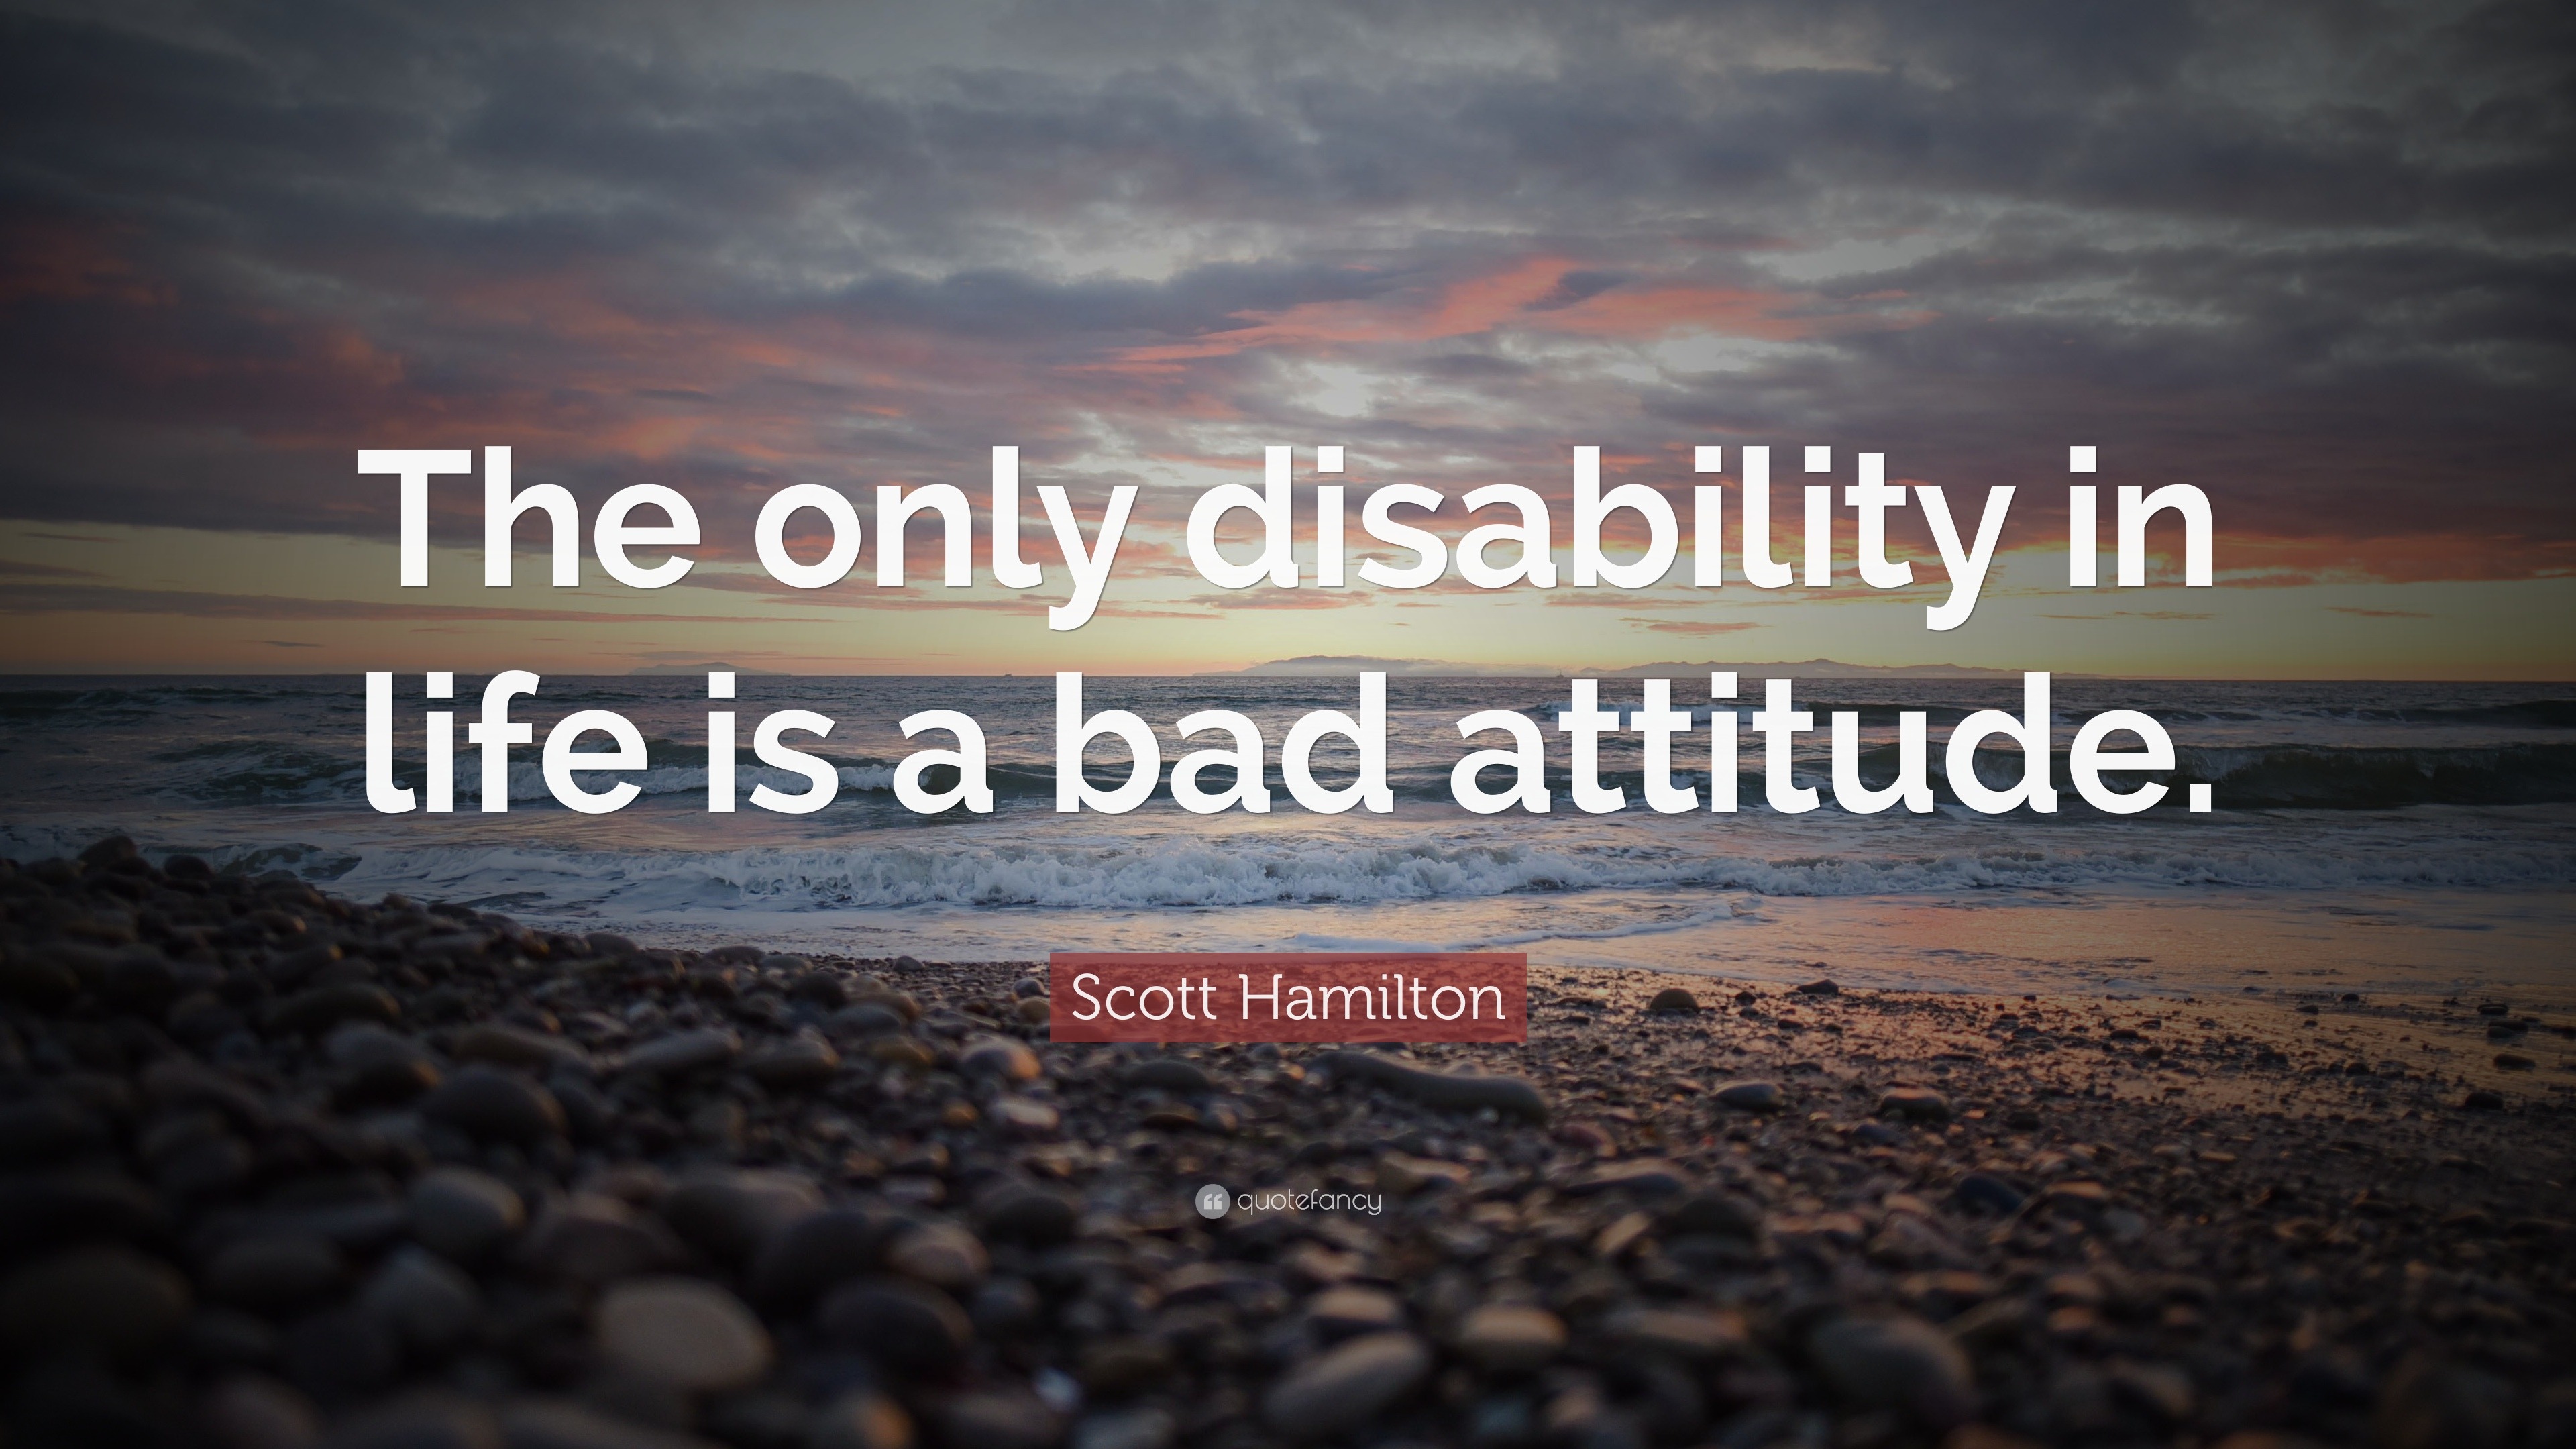 Scott Hamilton Quote: “The only disability in life is a bad attitude